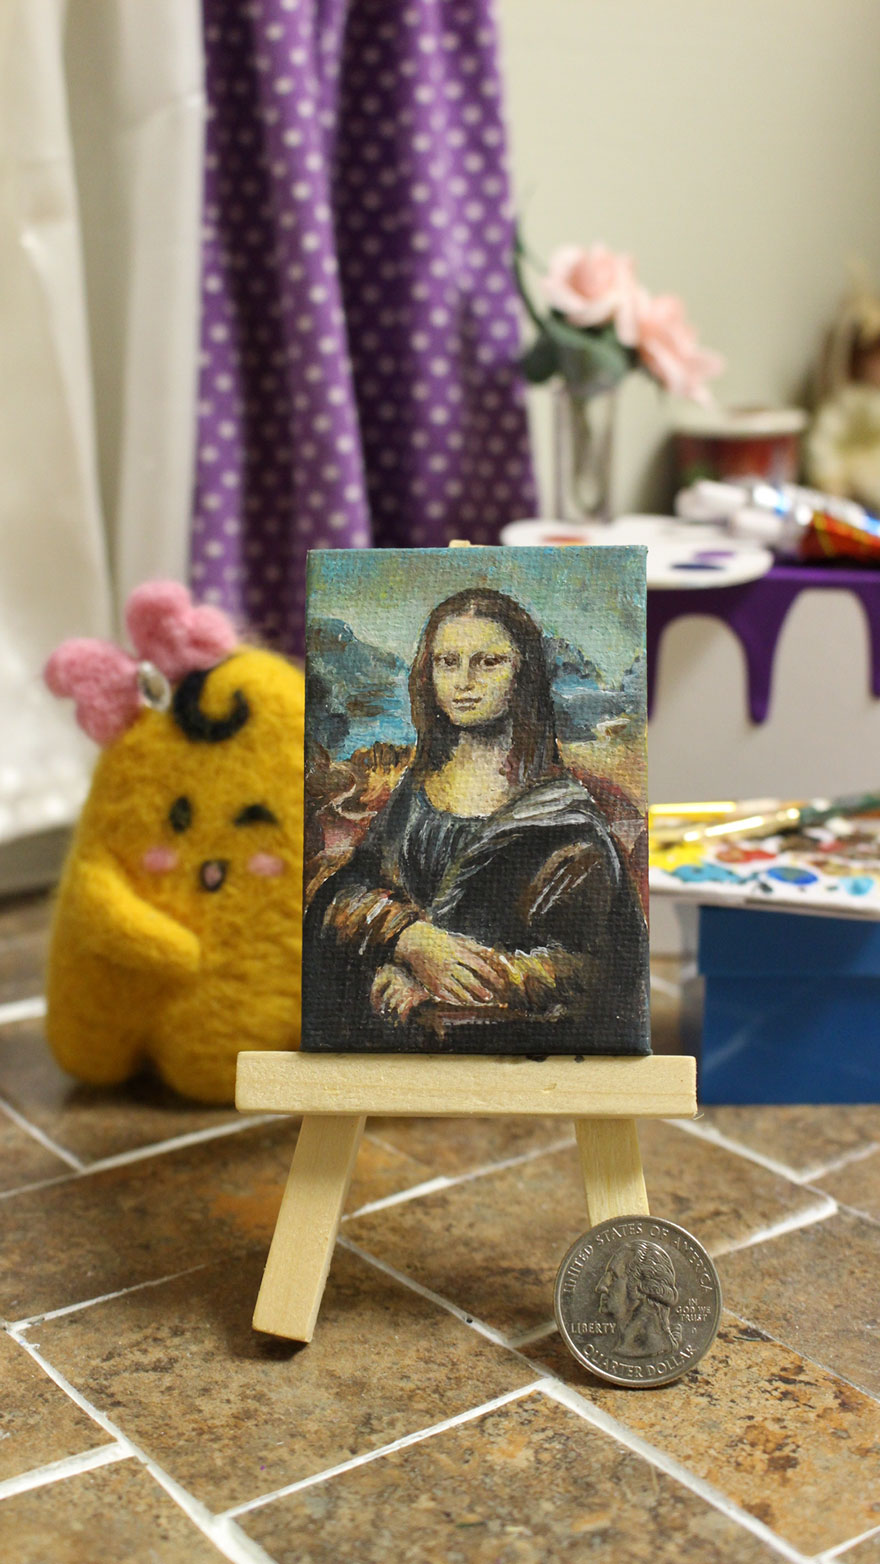 Did I Paint The World's Smallest Painting Of Mona Lisa?